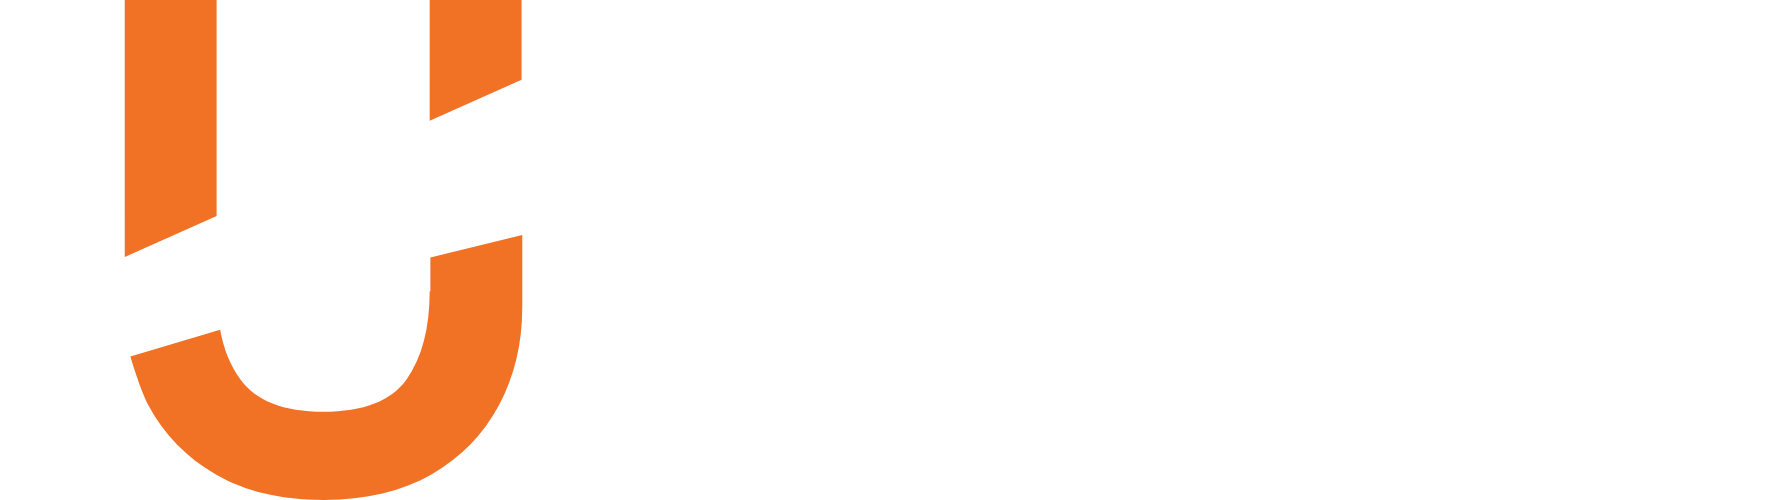 UDisc logo with white text